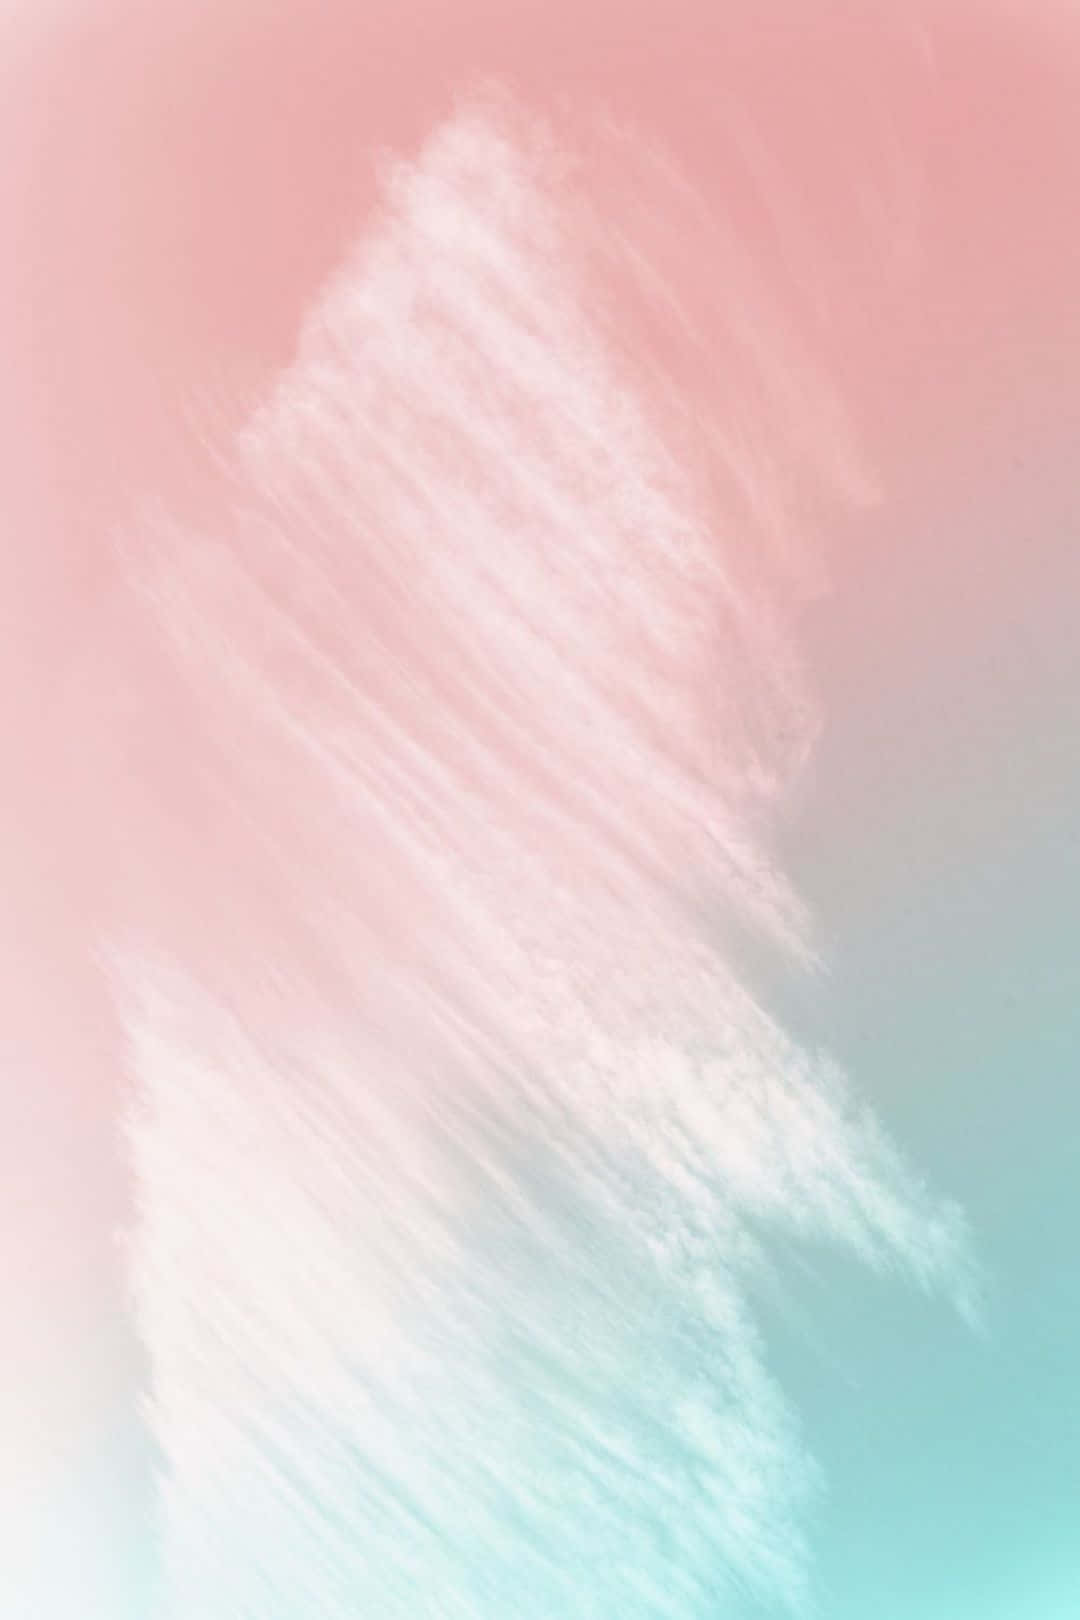 A Pink And Turquoise Abstract Background With Clouds